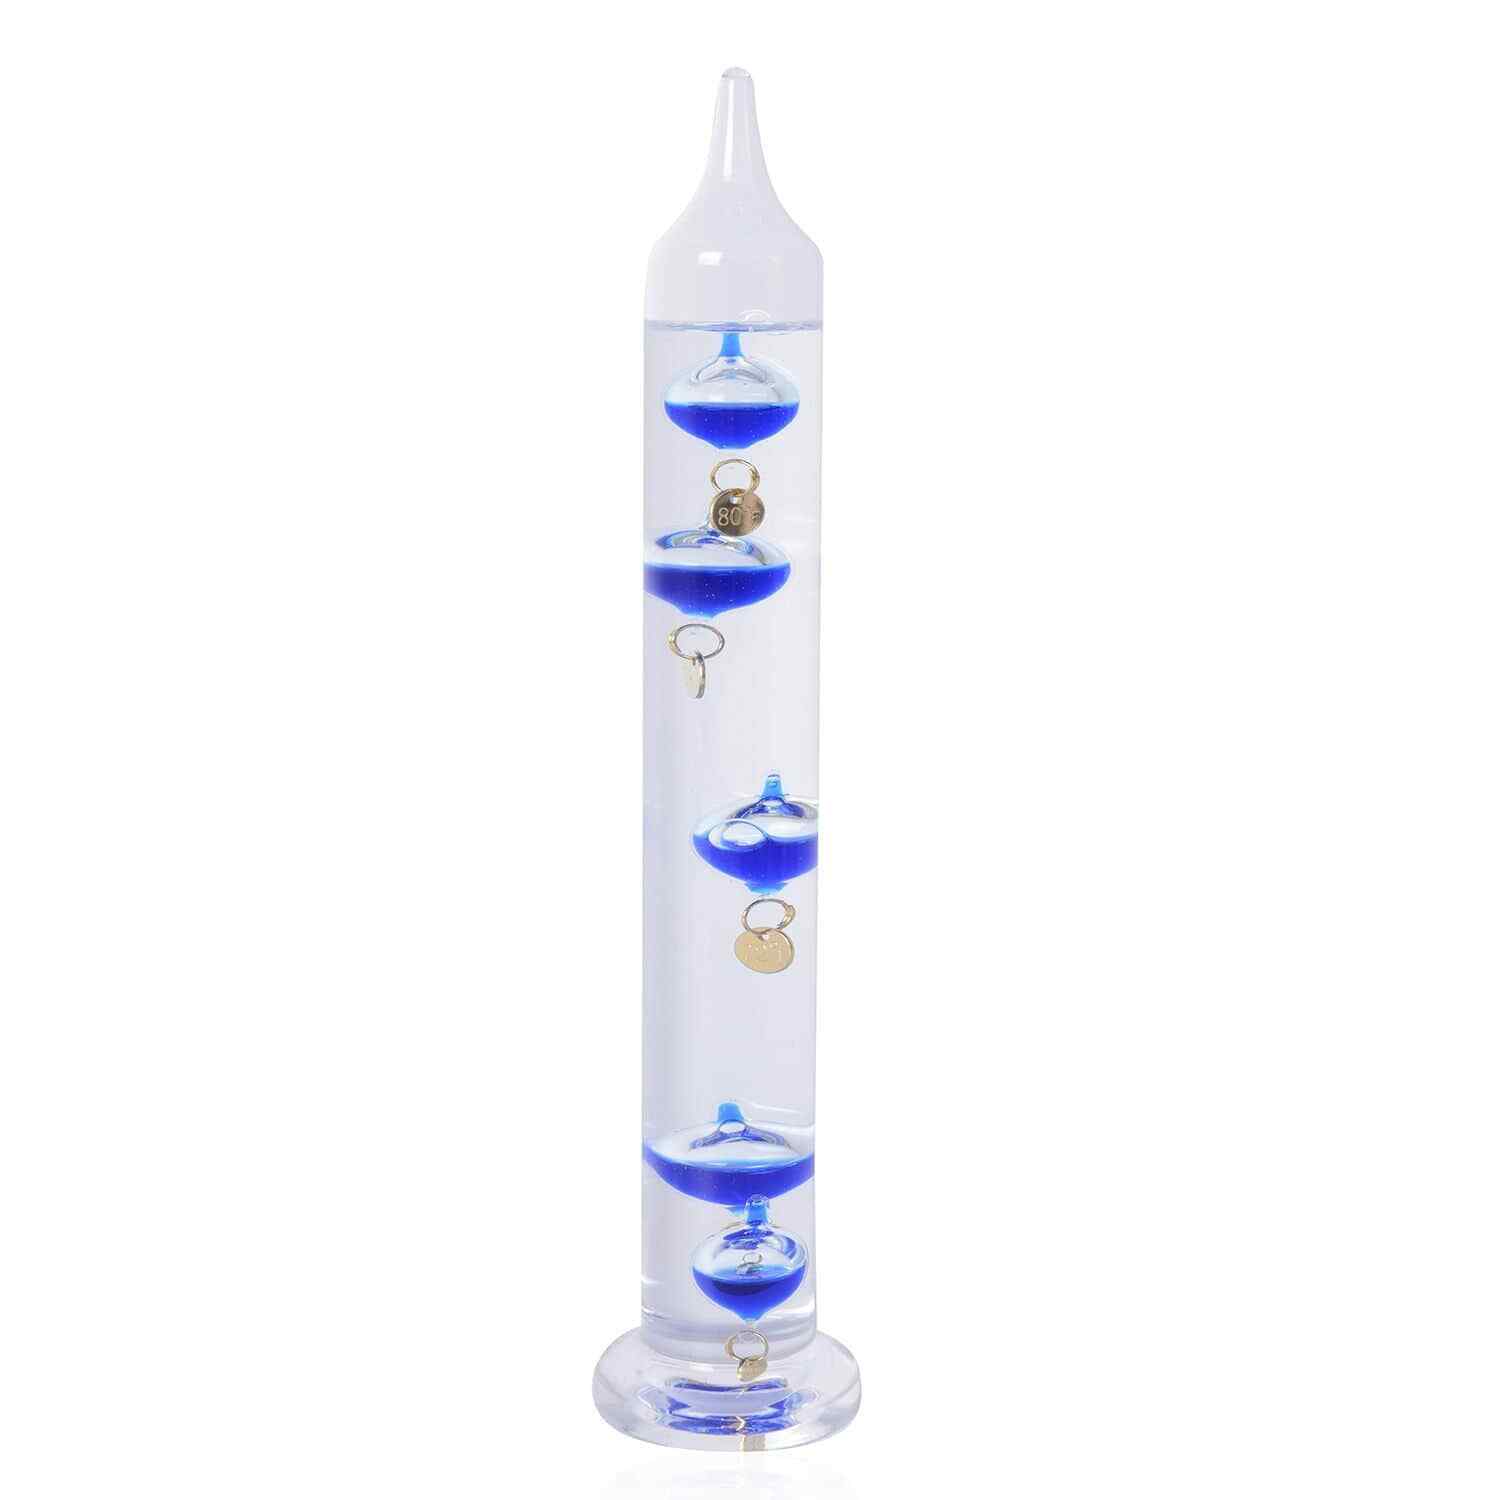 Galileo Thermometer Glass with Blue Floating Balls Office Table Home Decor Gifts